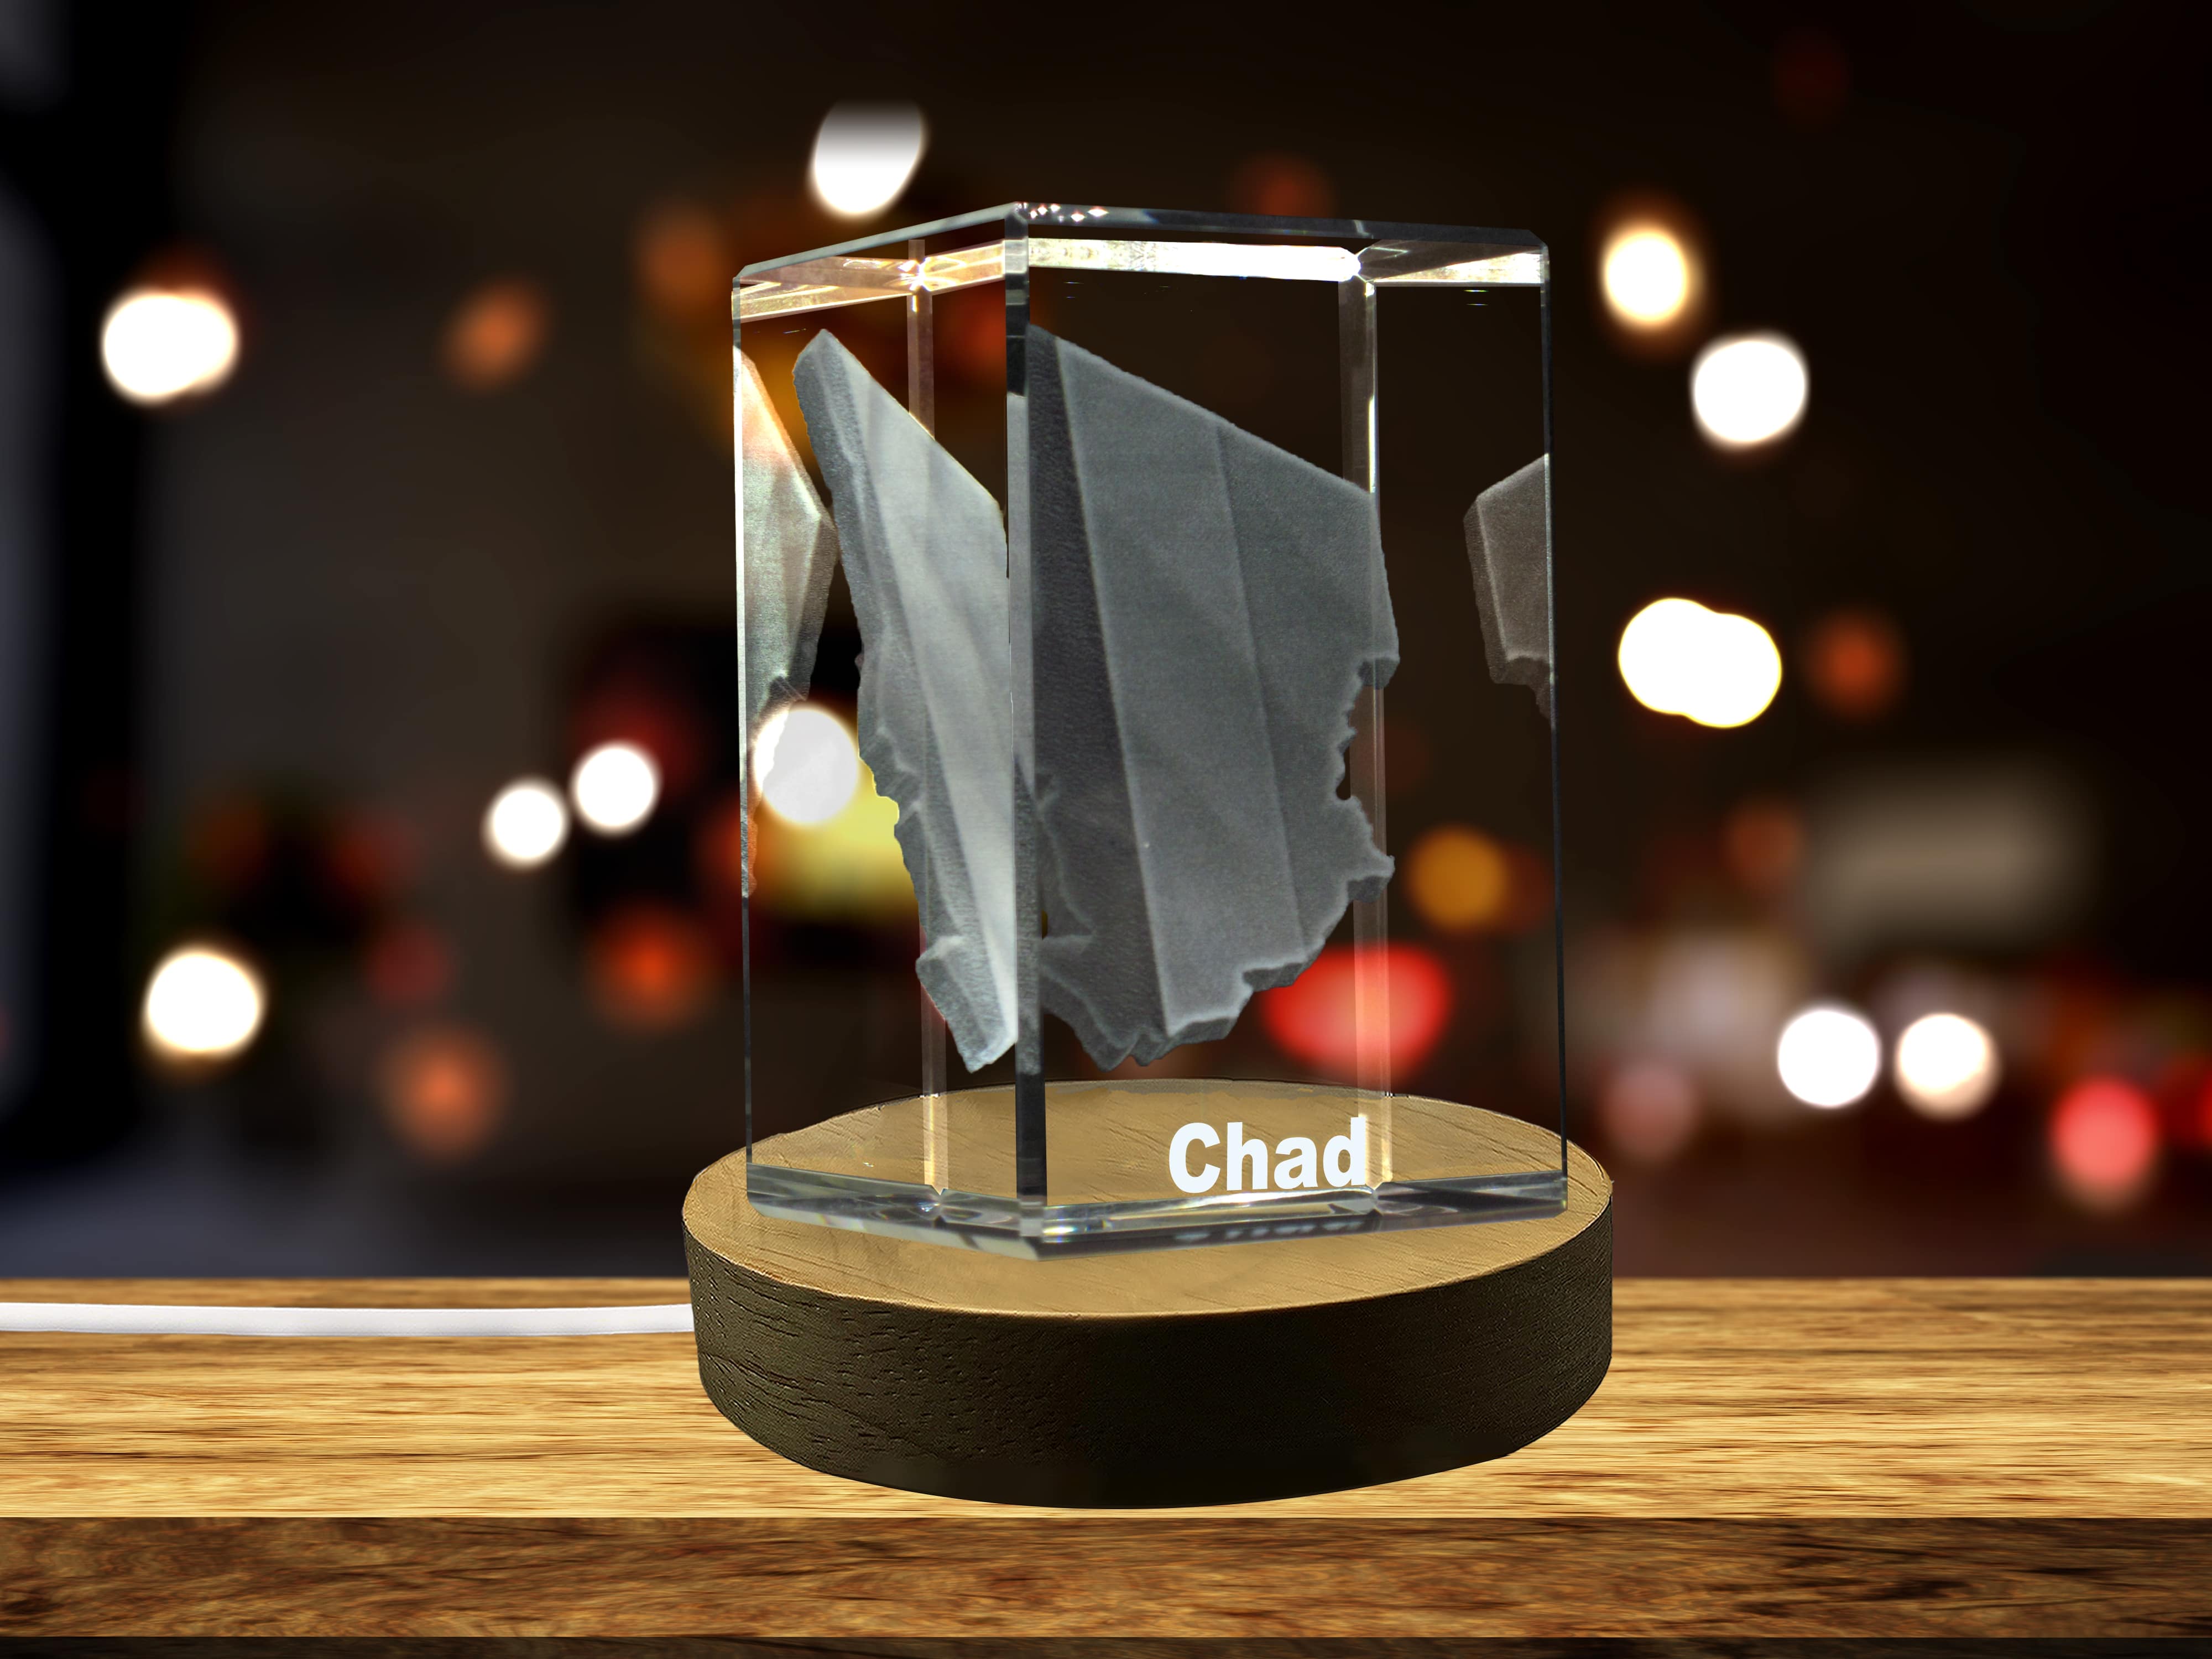 Chad 3D Engraved Crystal 3D Engraved Crystal Keepsake/Gift/Decor/Collectible/Souvenir A&B Crystal Collection